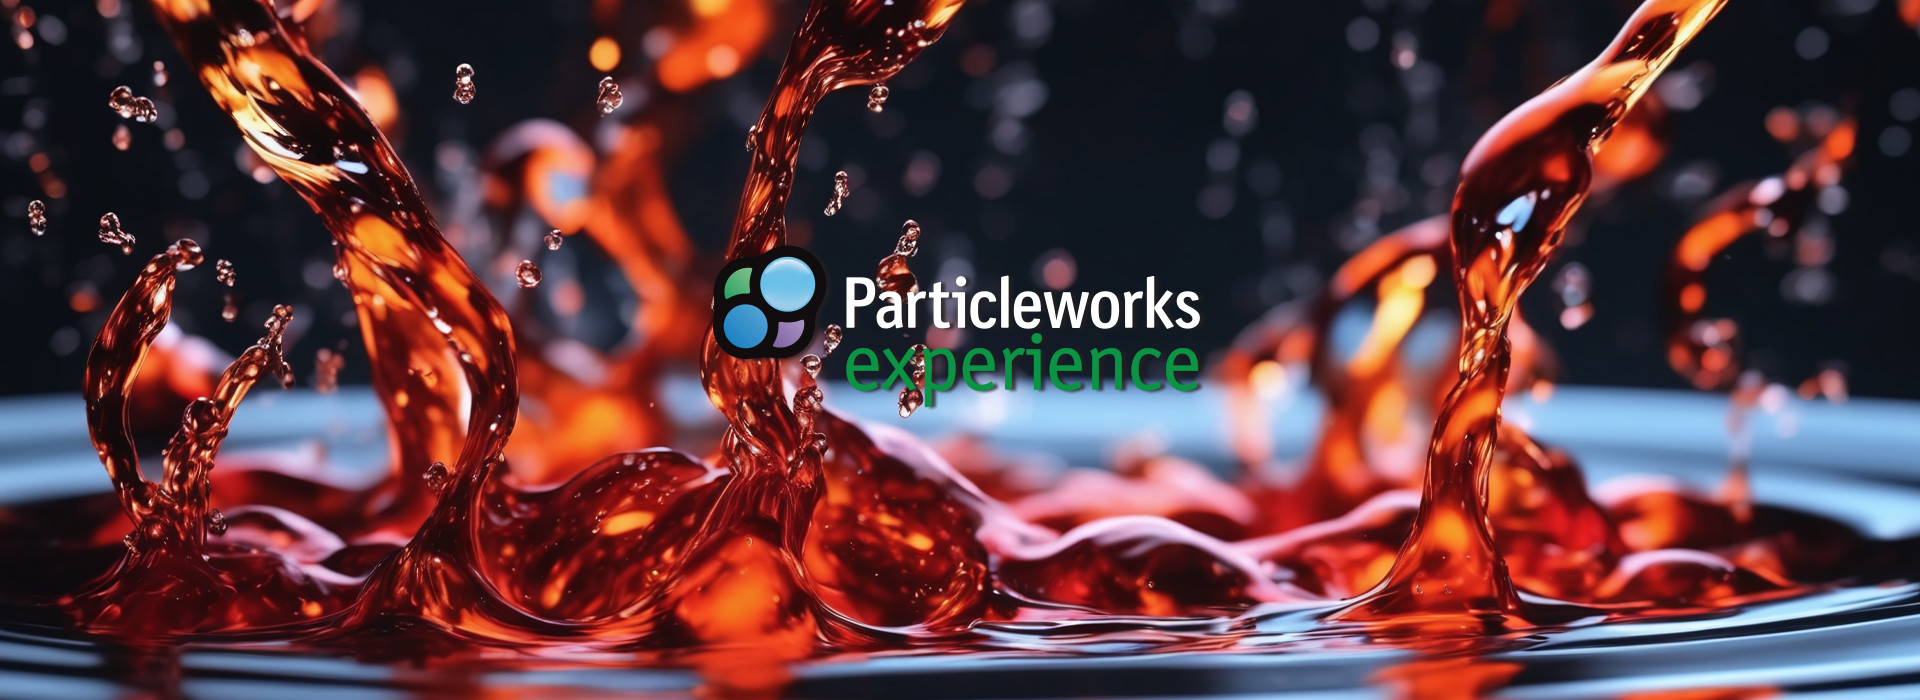 Particleworks Experience